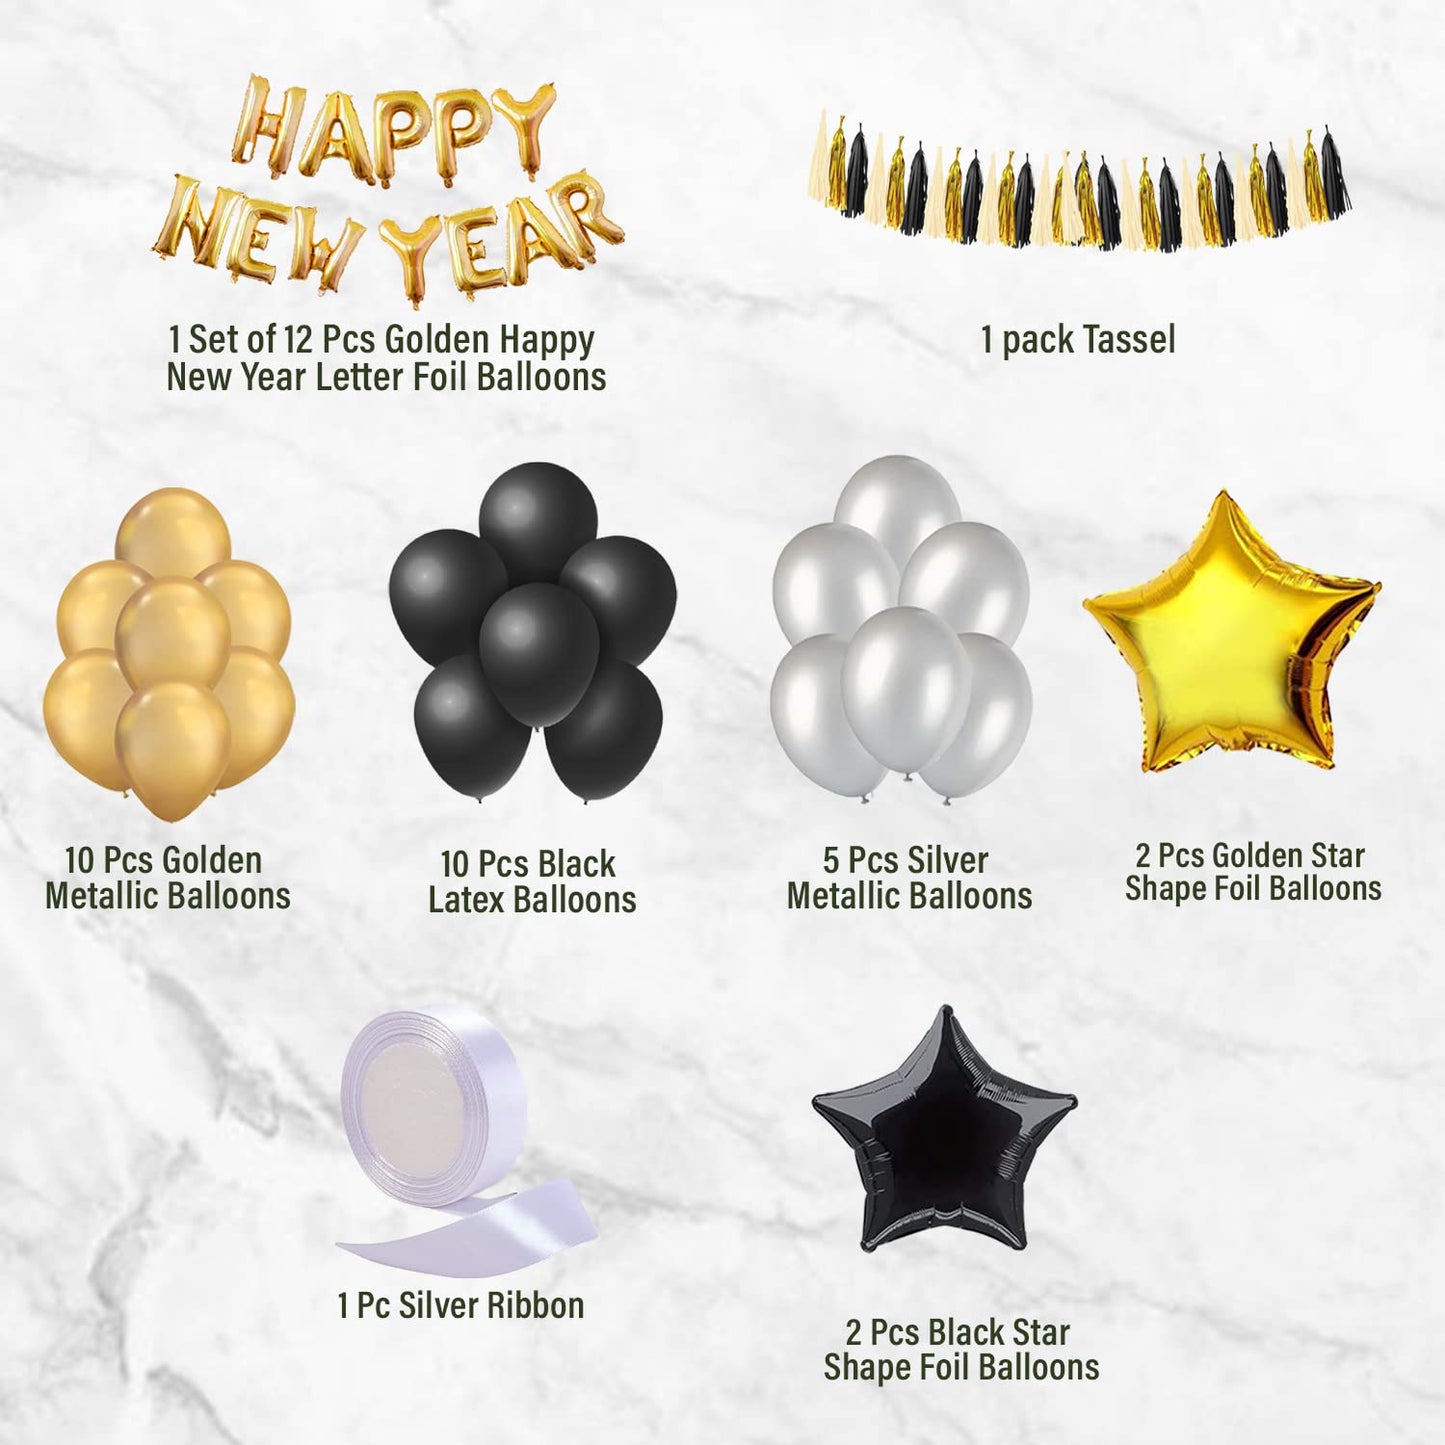 Black & Golden Happy New Year Decoration - Pack of 43 Pcs - New Year Foil, Star Shape Foil, Tassle, Metallic & Latex Balloons For House Party - CherishX Partystore